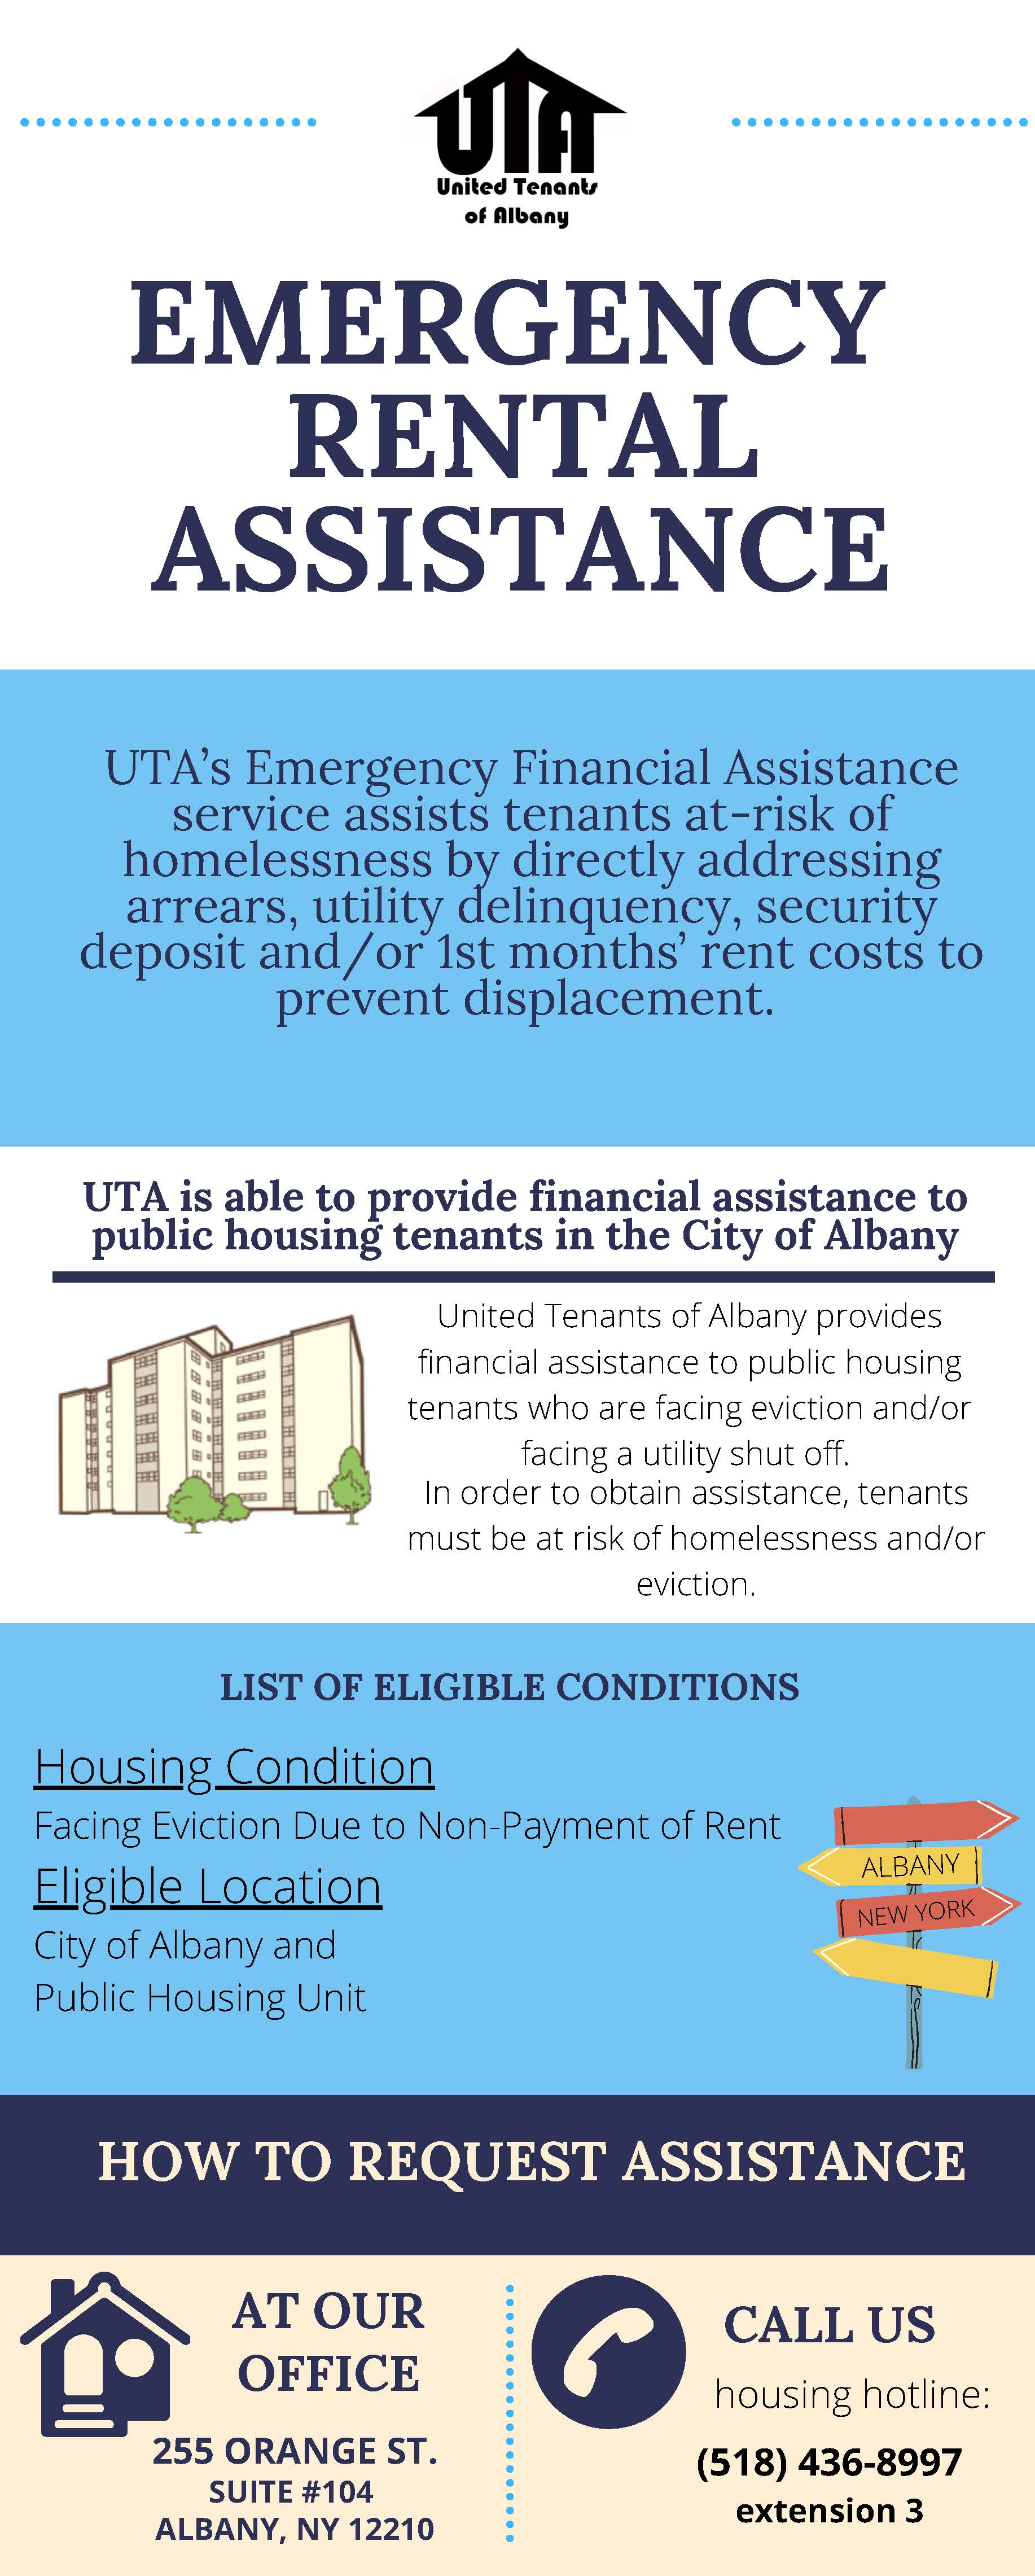 Rental Assistance info graphic